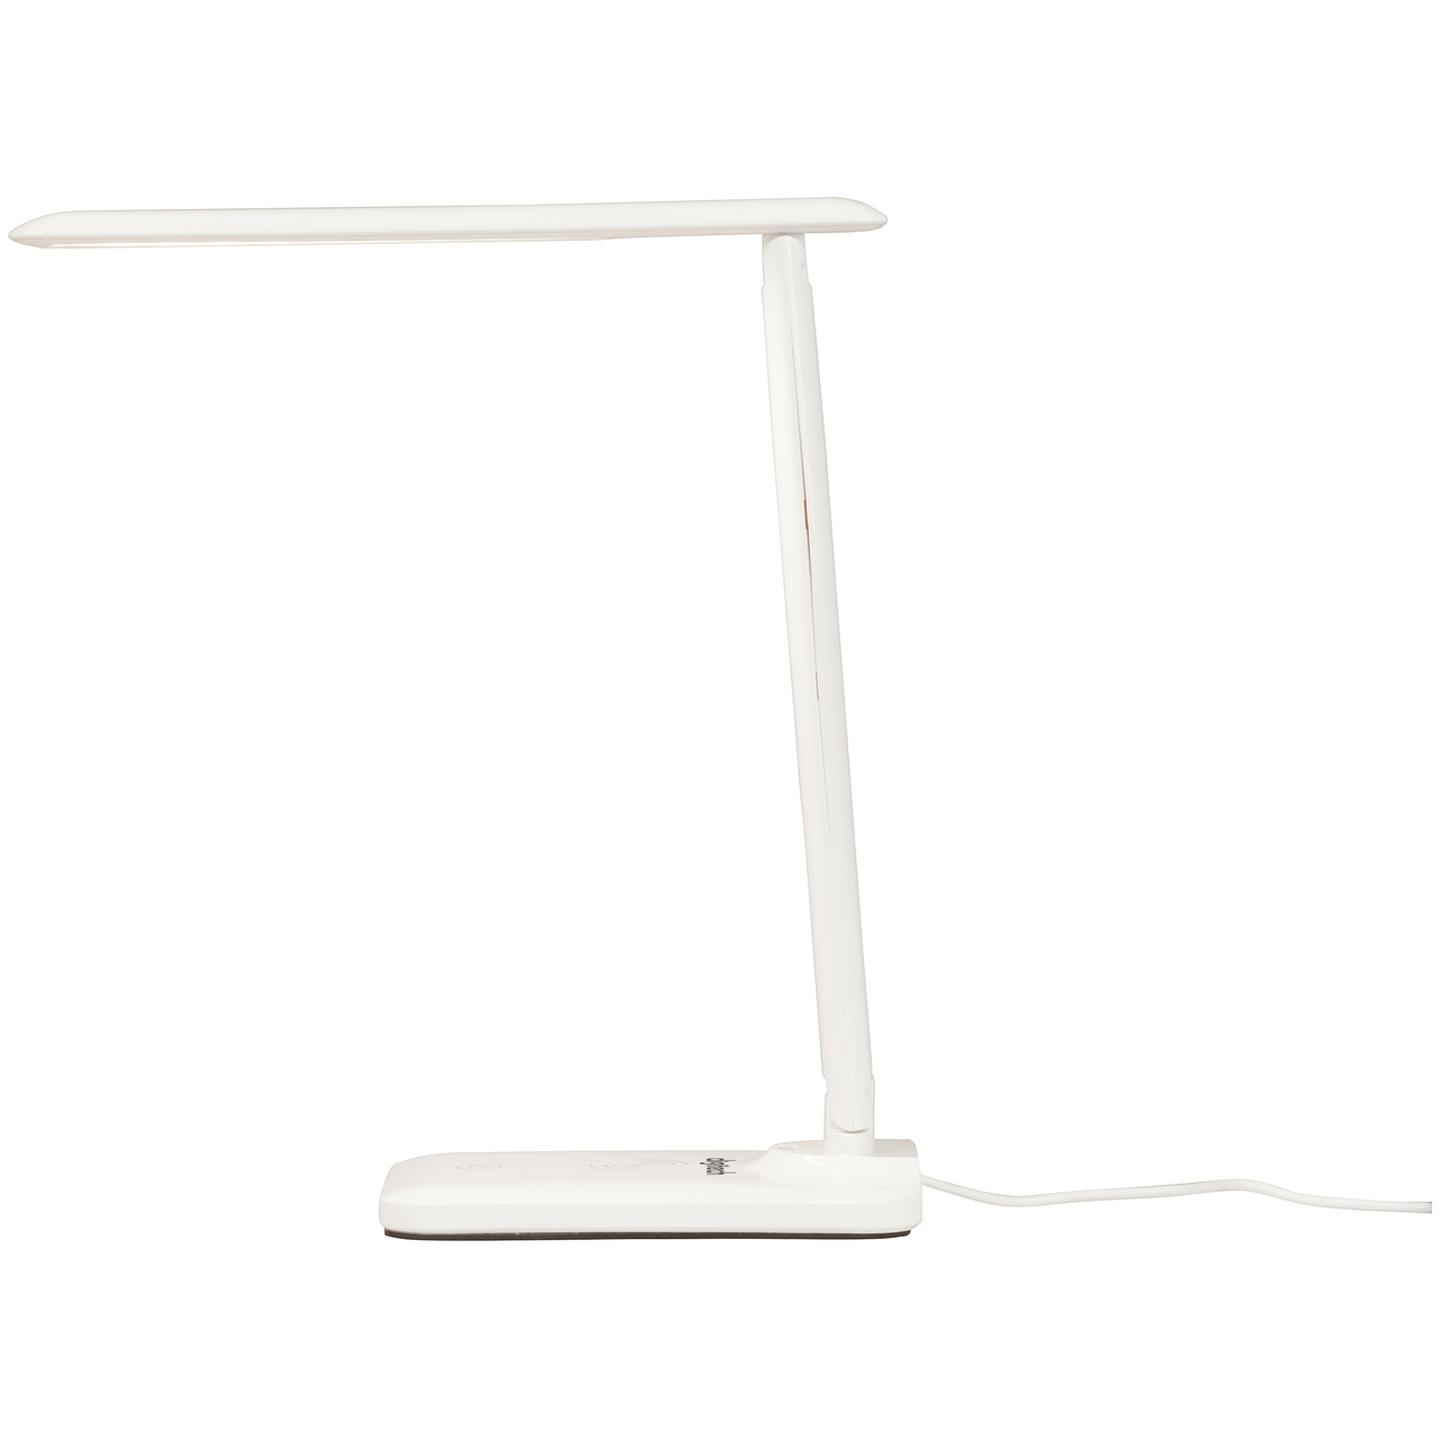 LED Desk Lamp with Qi Wireless Charging